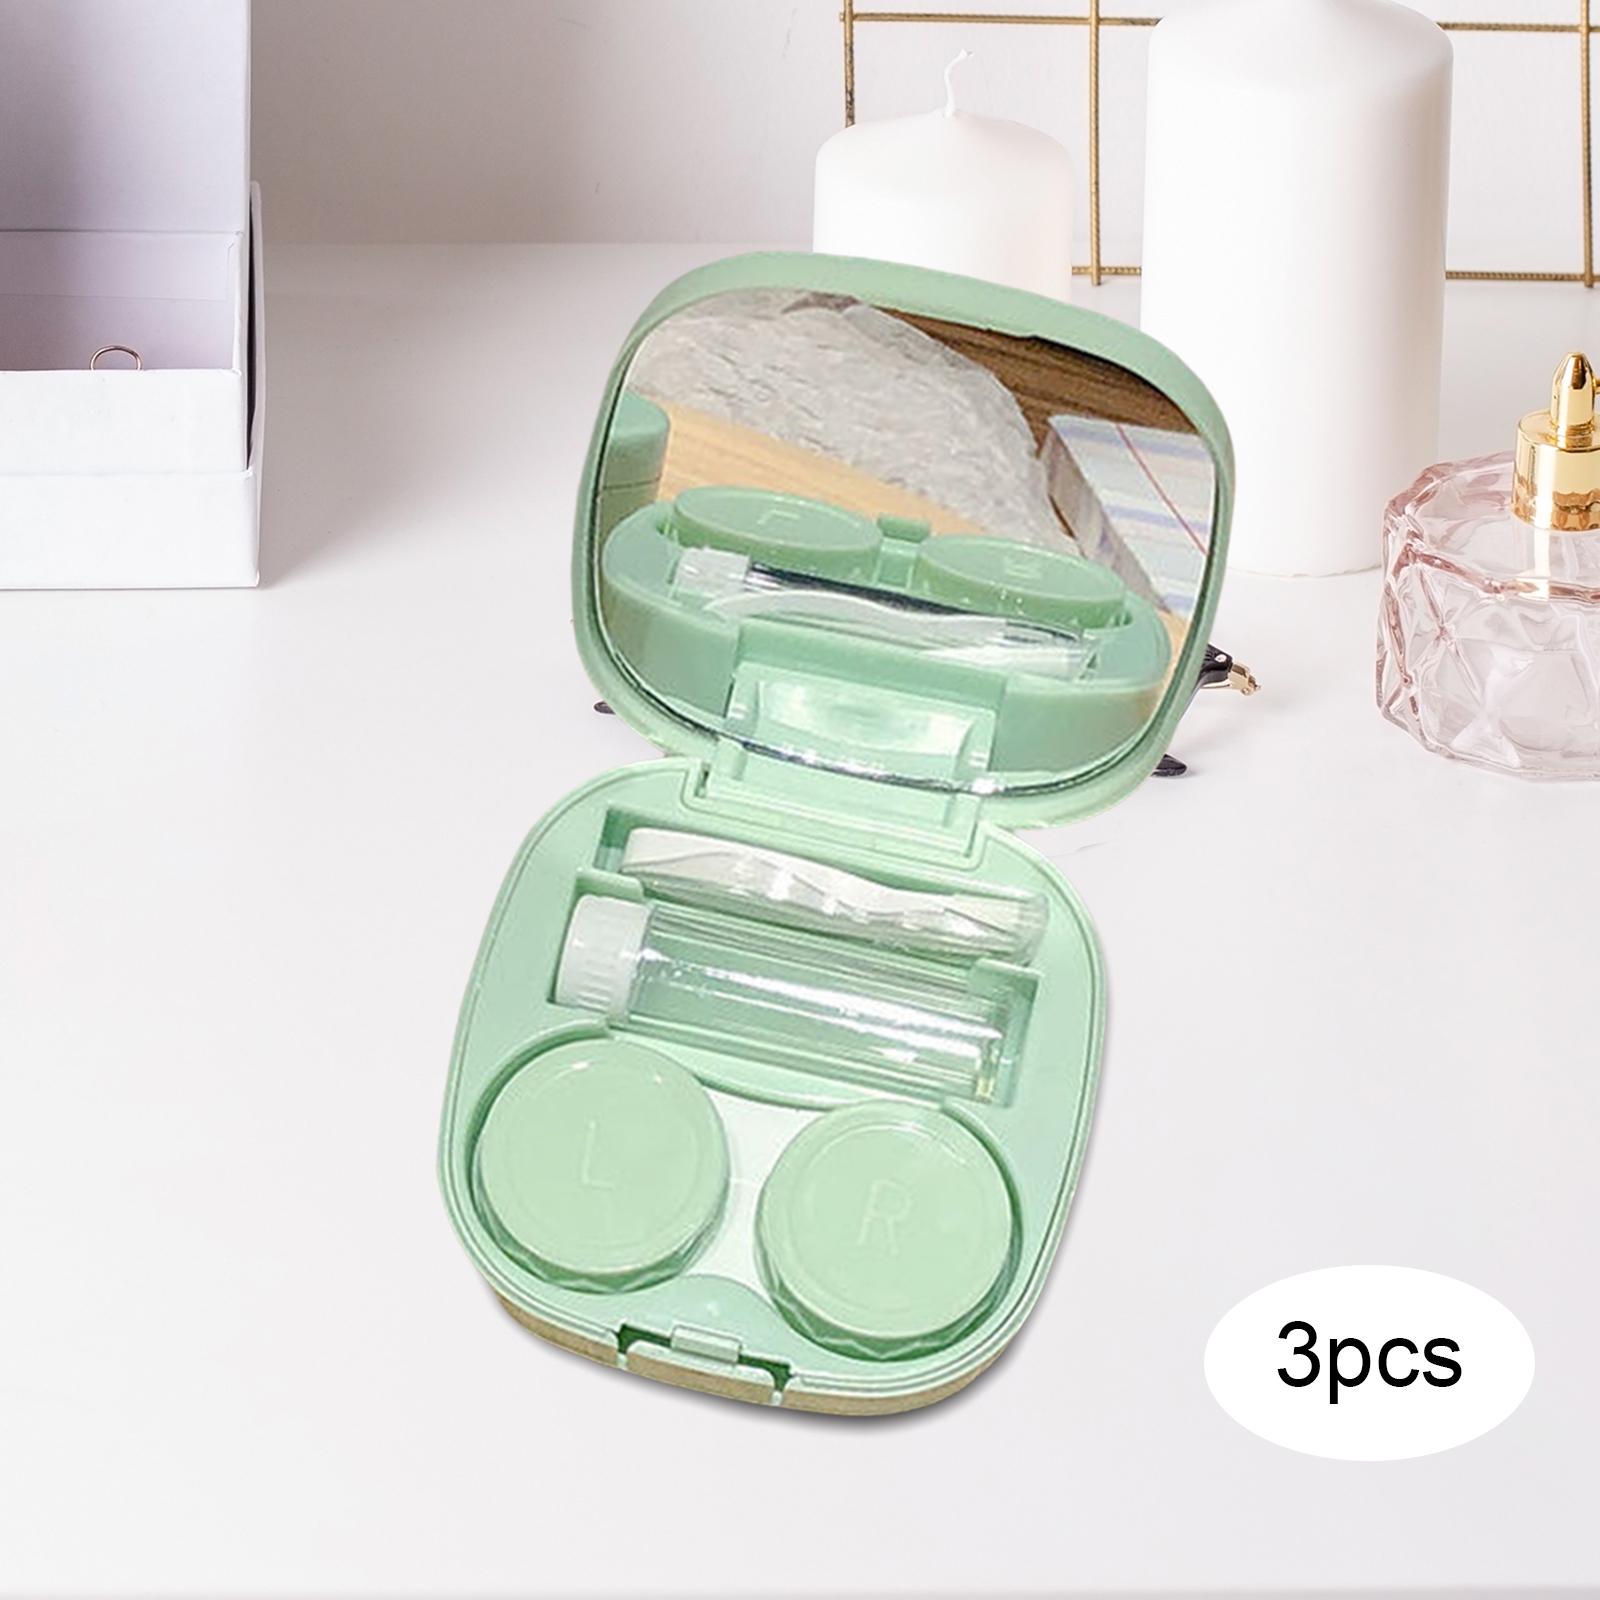 Pack of 3 Compact Contact Lens Case Kit with Mirror Durable Convenient Small Green